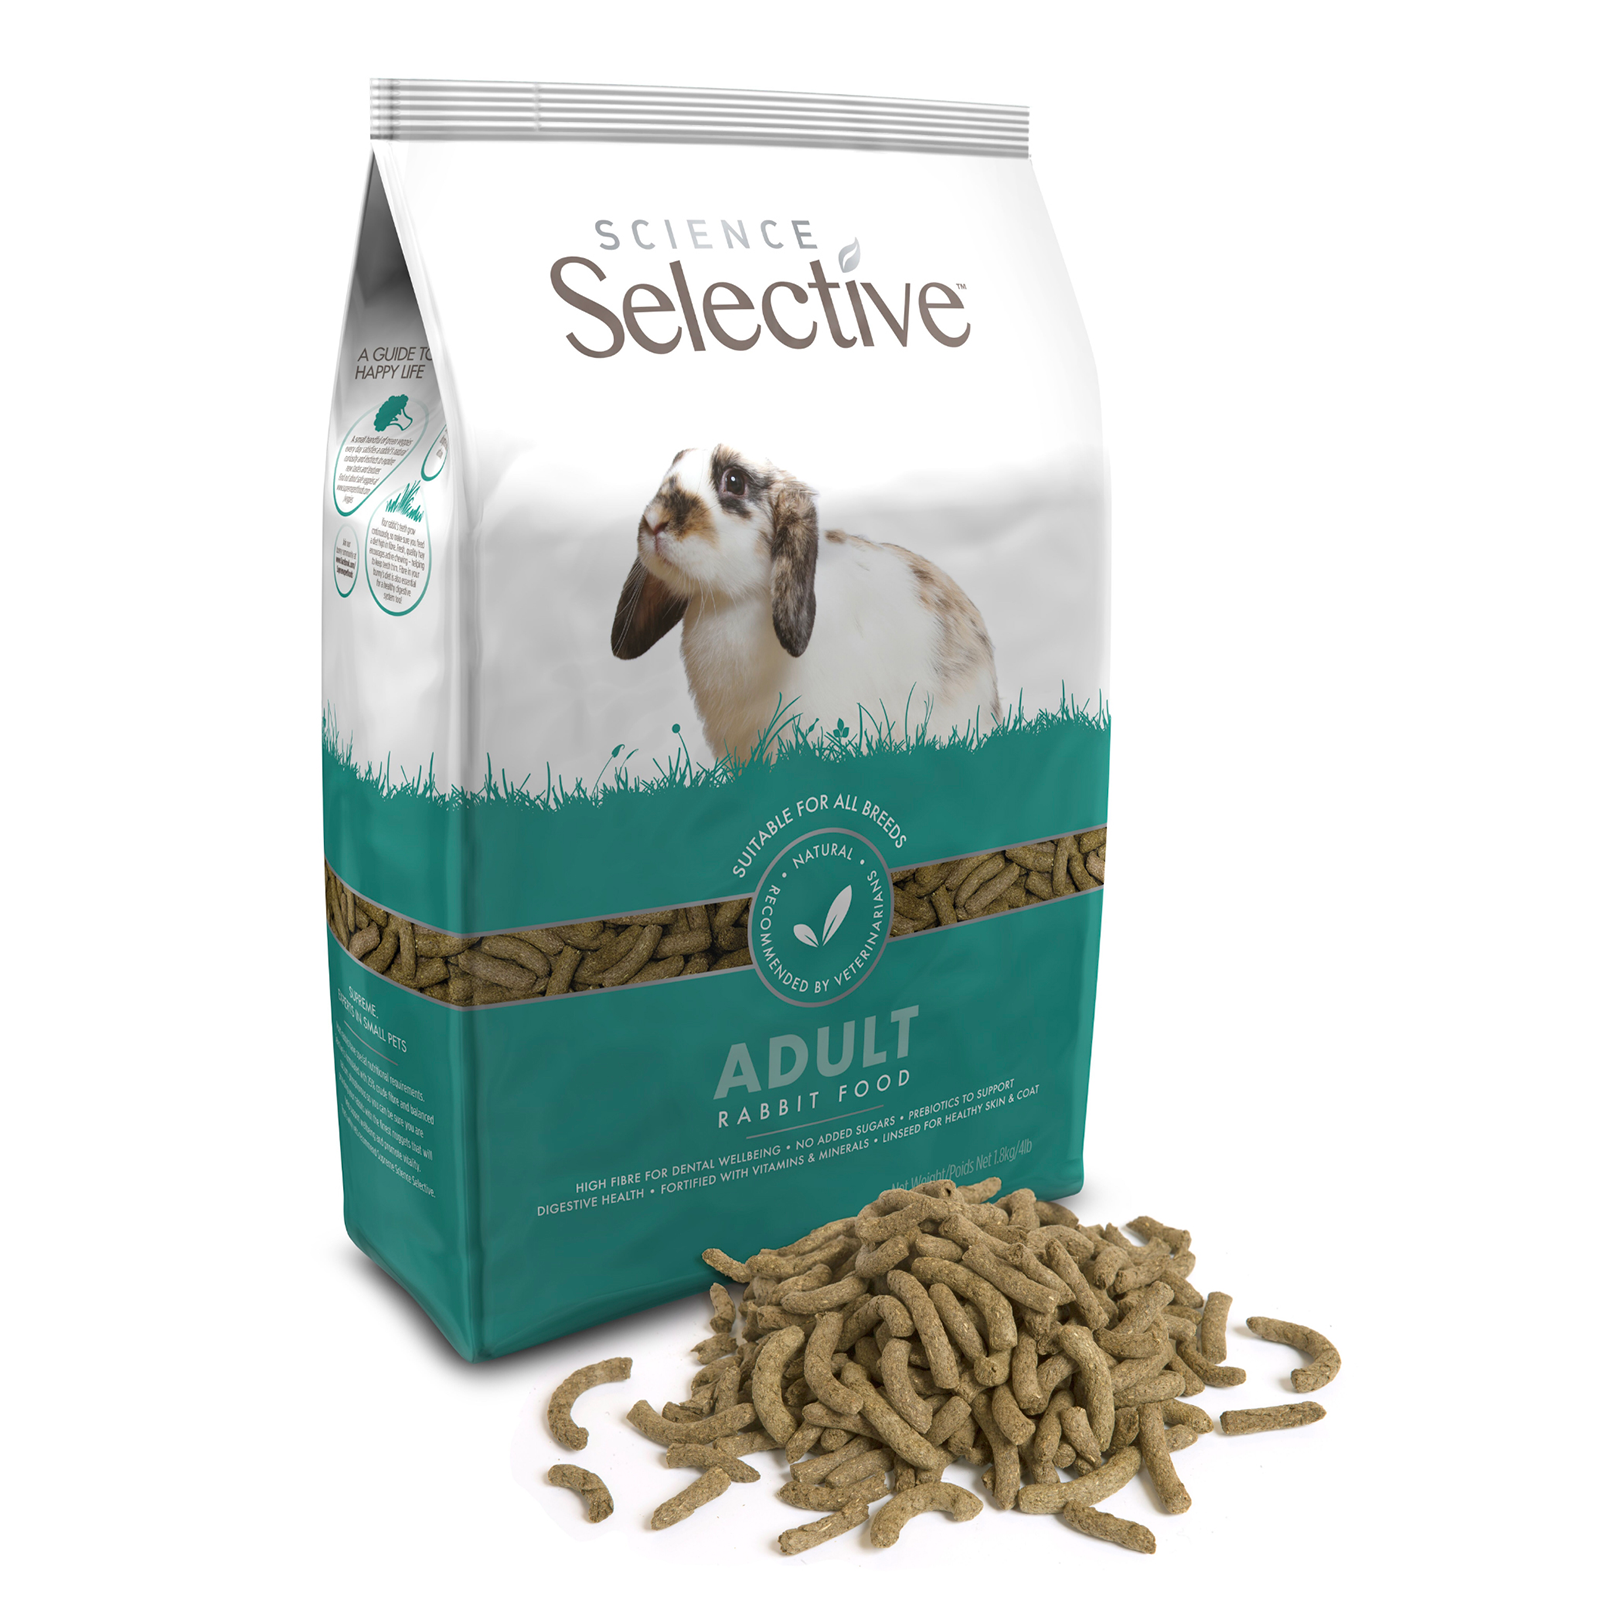 Science Selective Rabbit Adult Food